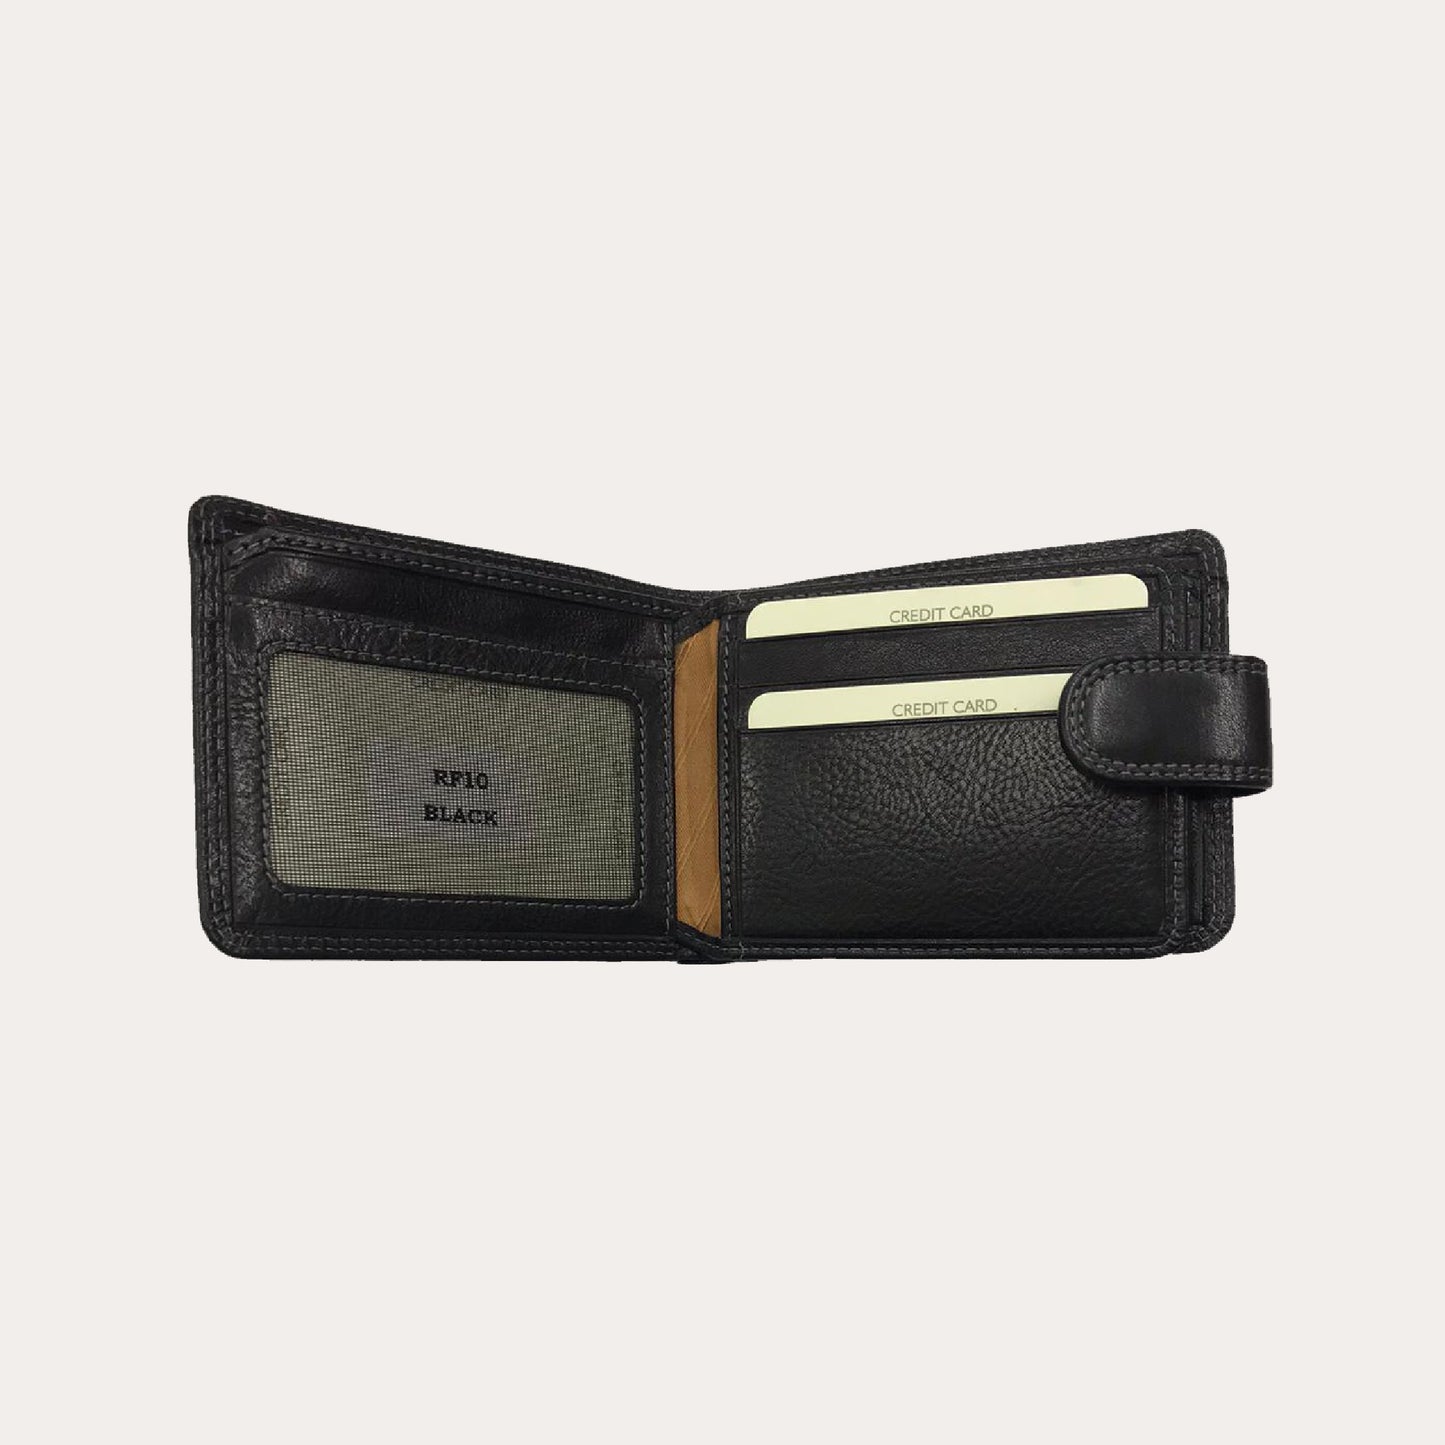 Black Leather Wallet-7 Credit Card/Coin Section